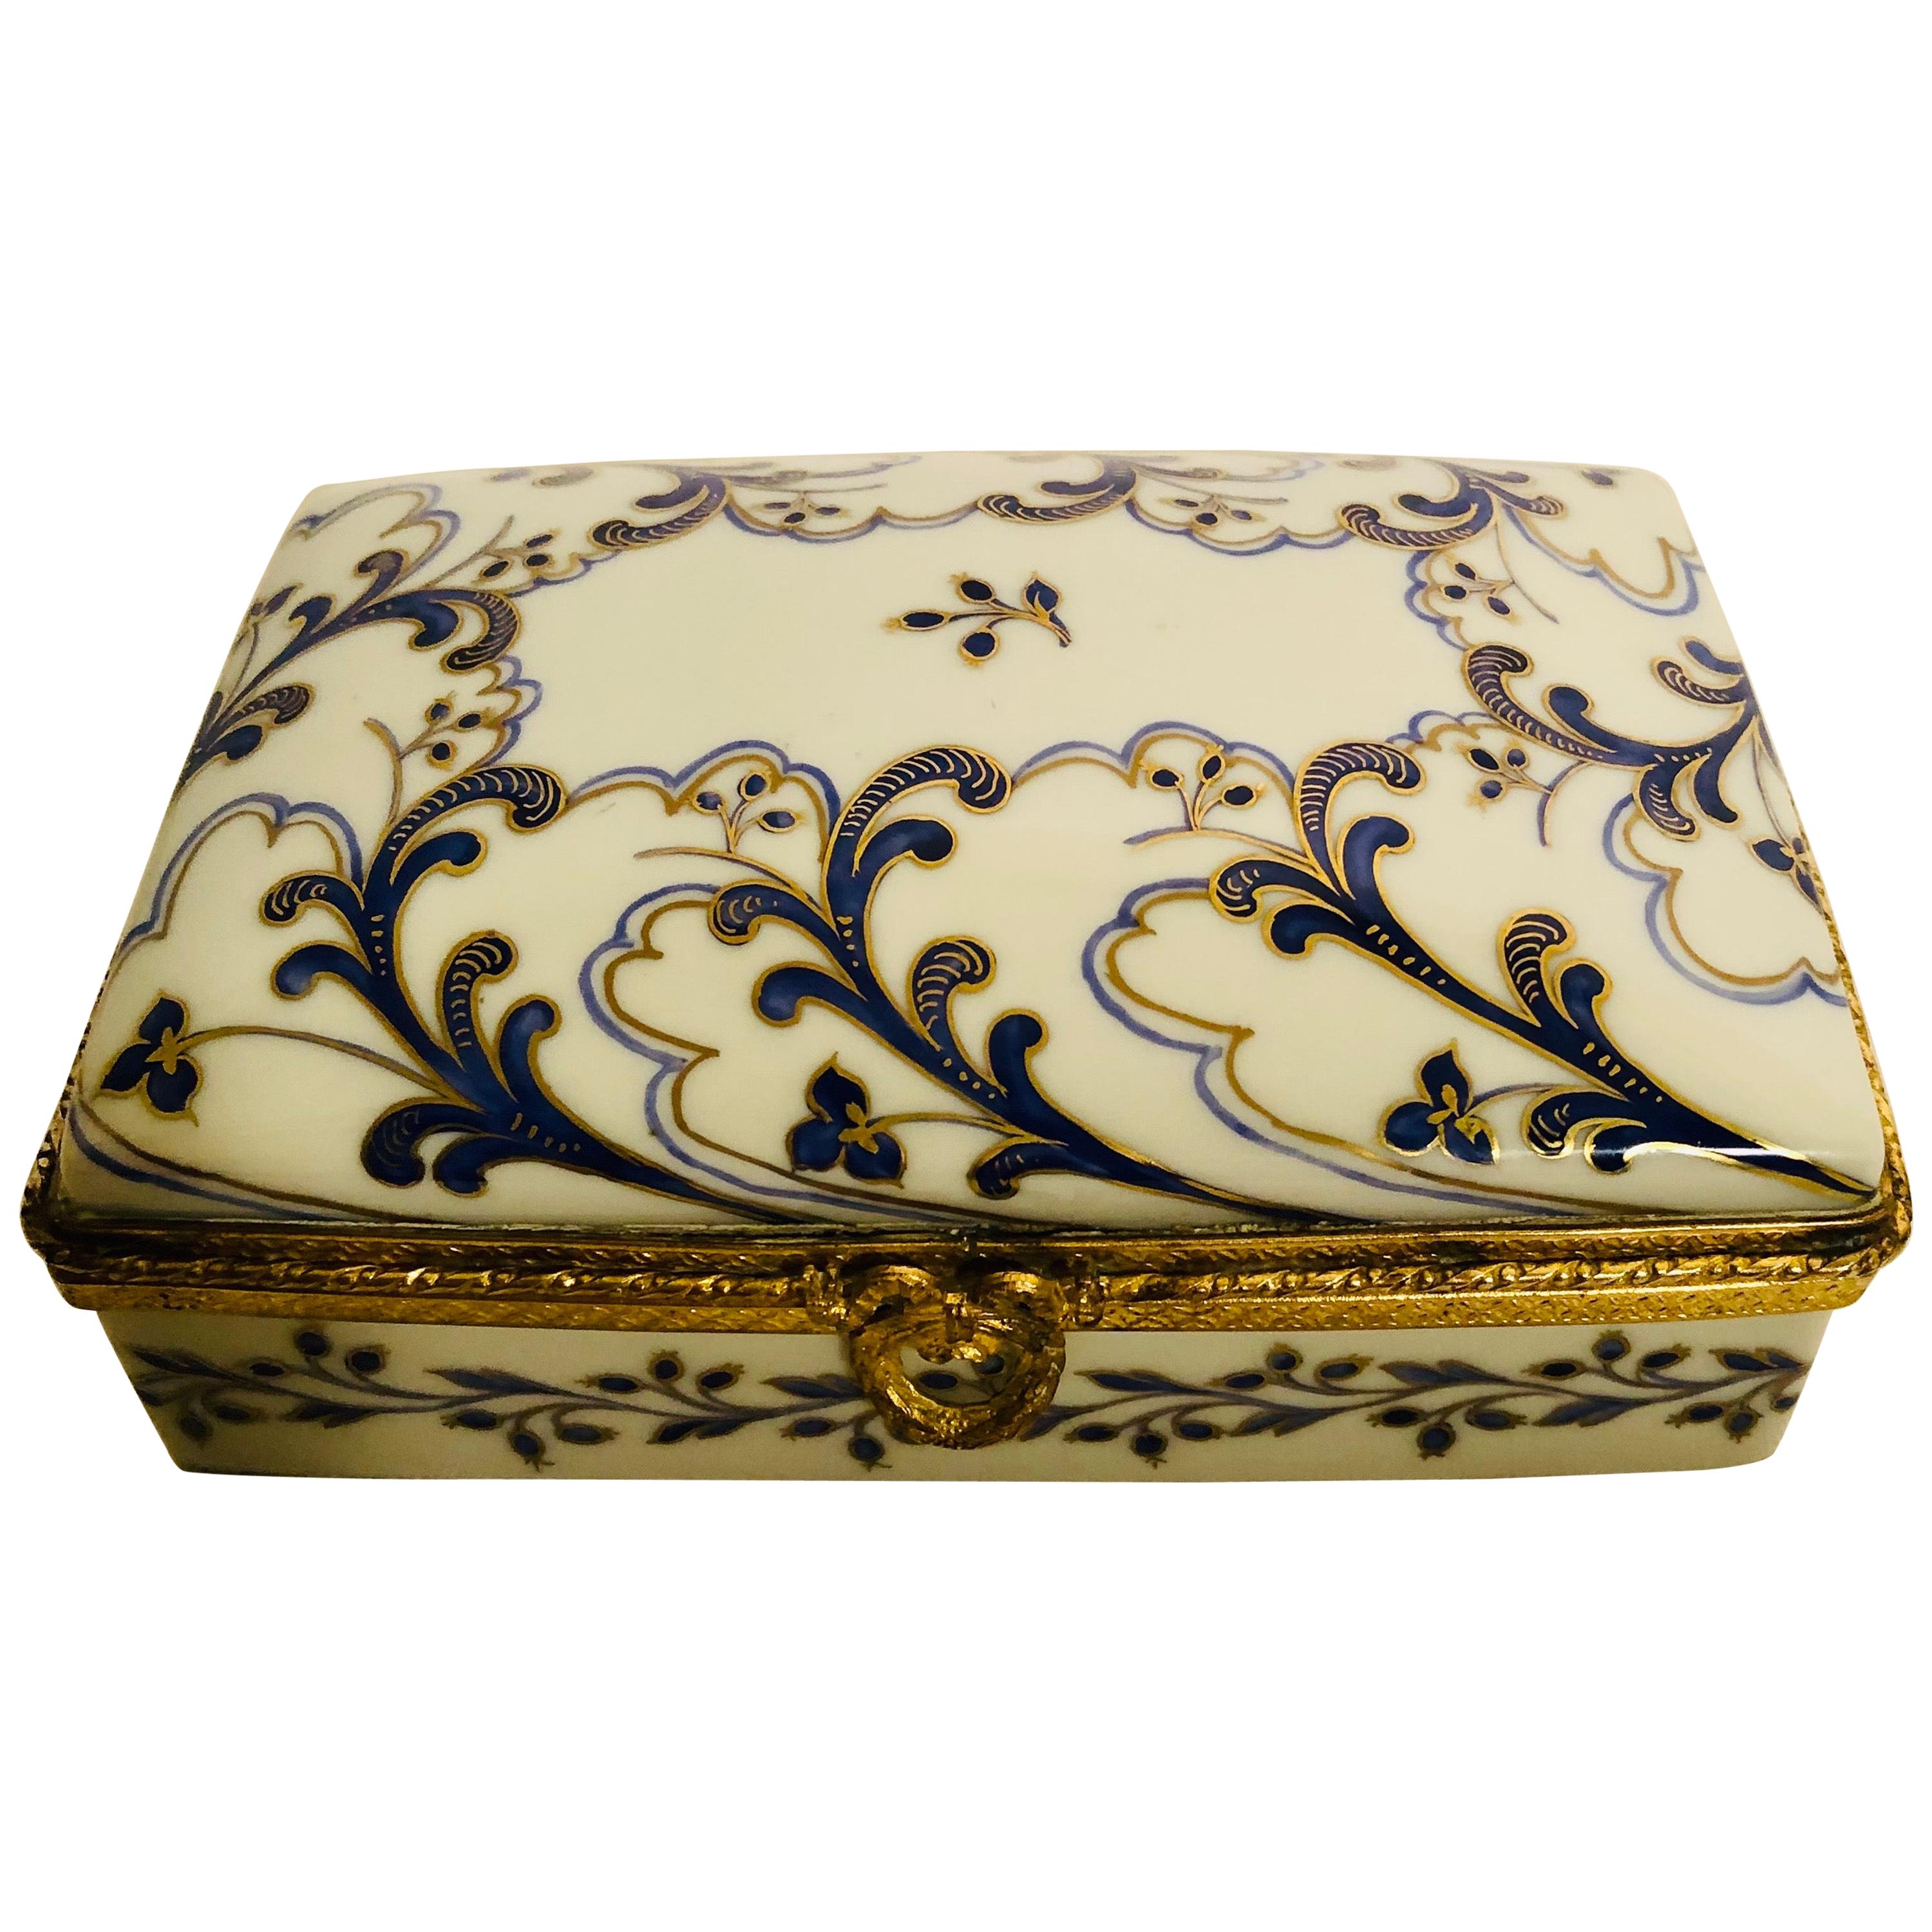 Le Tallec Porcelain Box with Hand-Painted Cobalt and Gold Arabesque Decoration